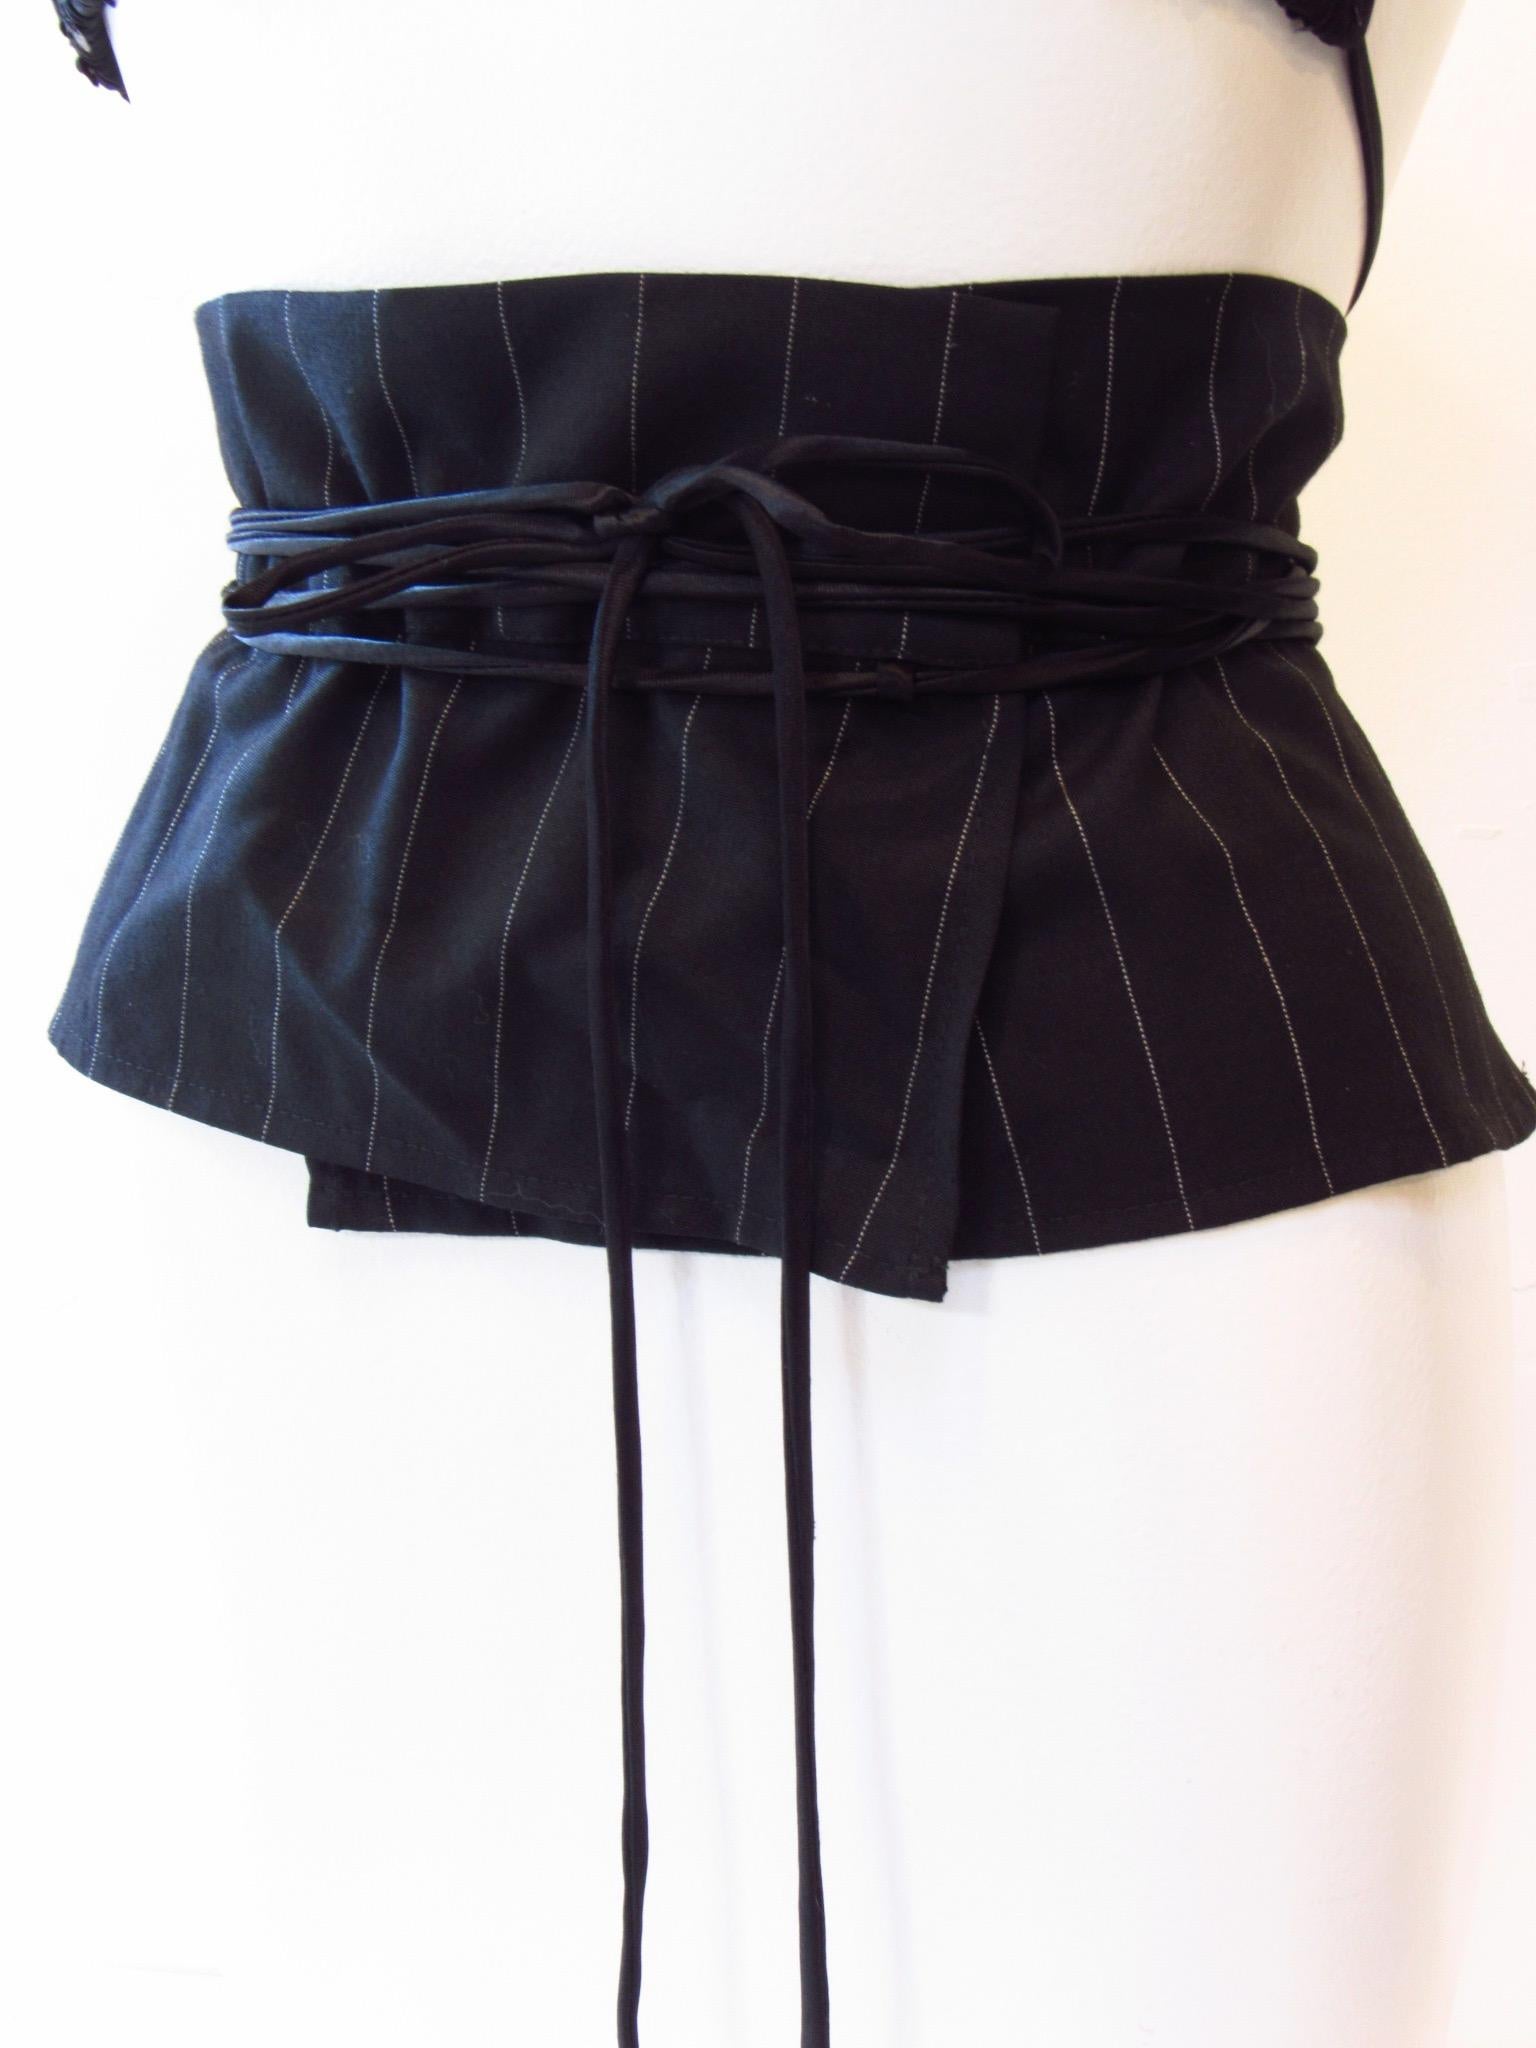 Maison Martin Margiela 2002 Collection black and white pinstriped wide waist belt with a back bustle and long satin self-tying string closures. New in Box with Tag.